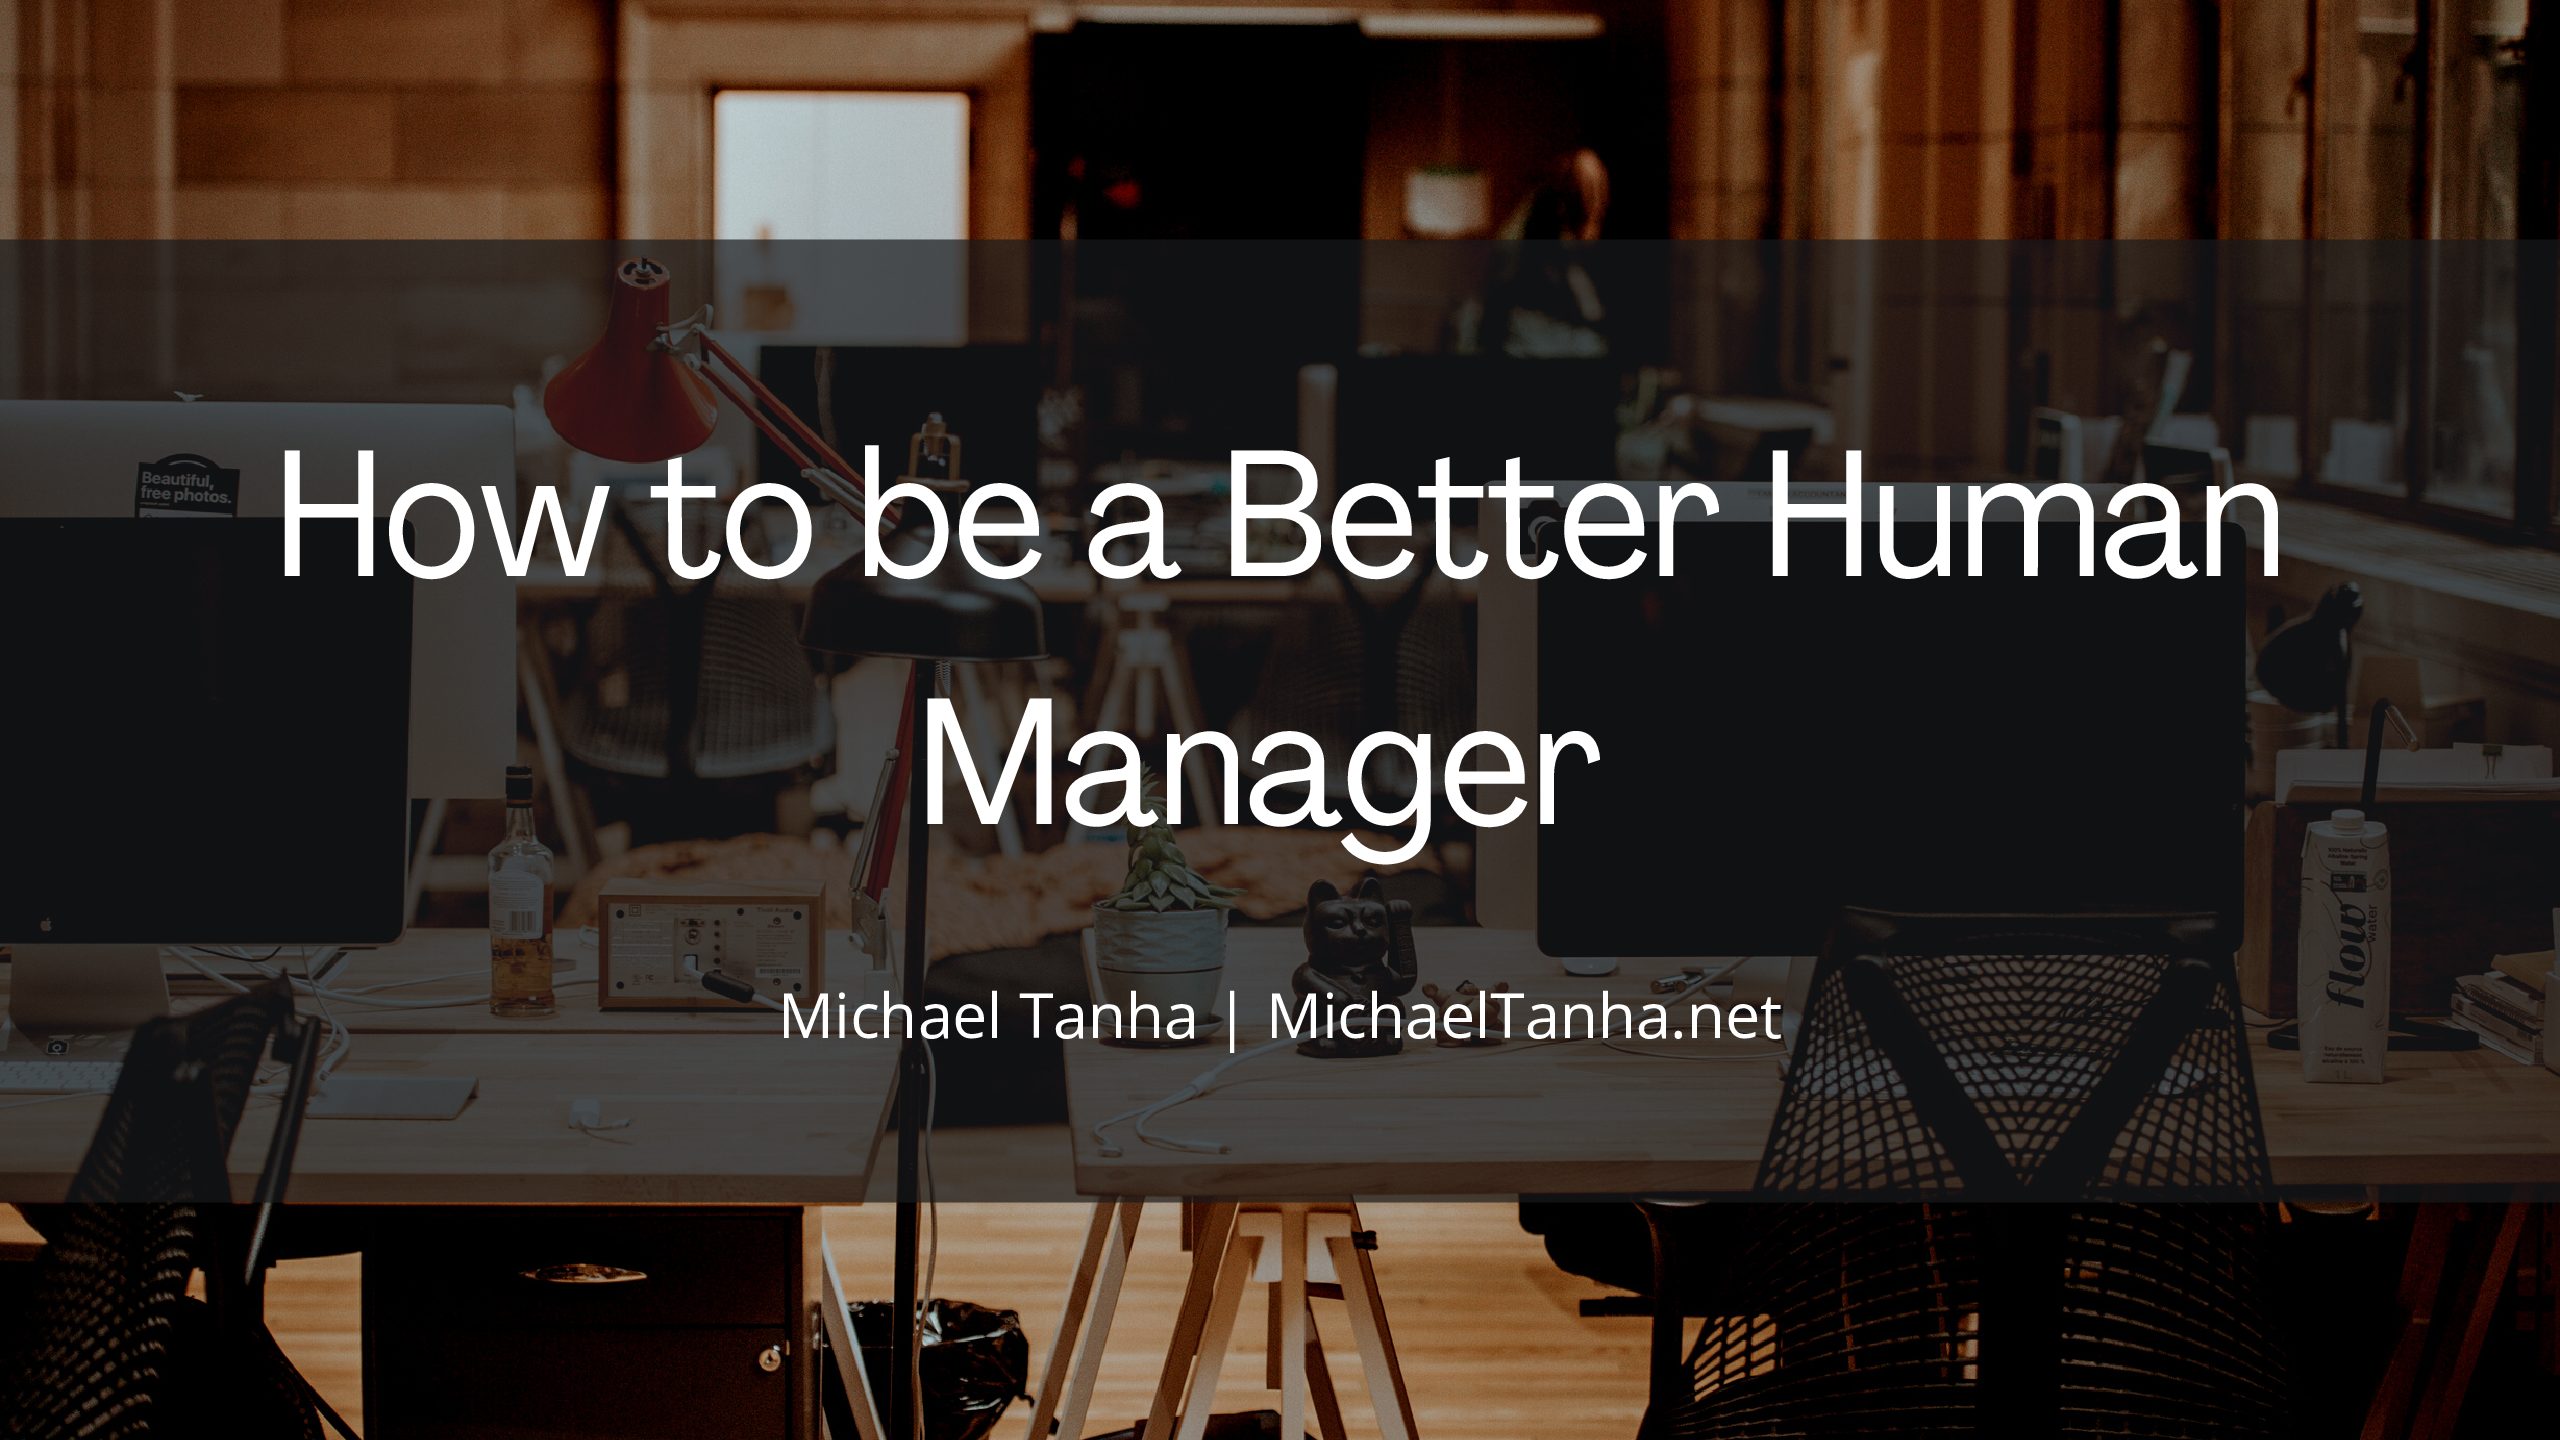 How to be a Better Human Manager